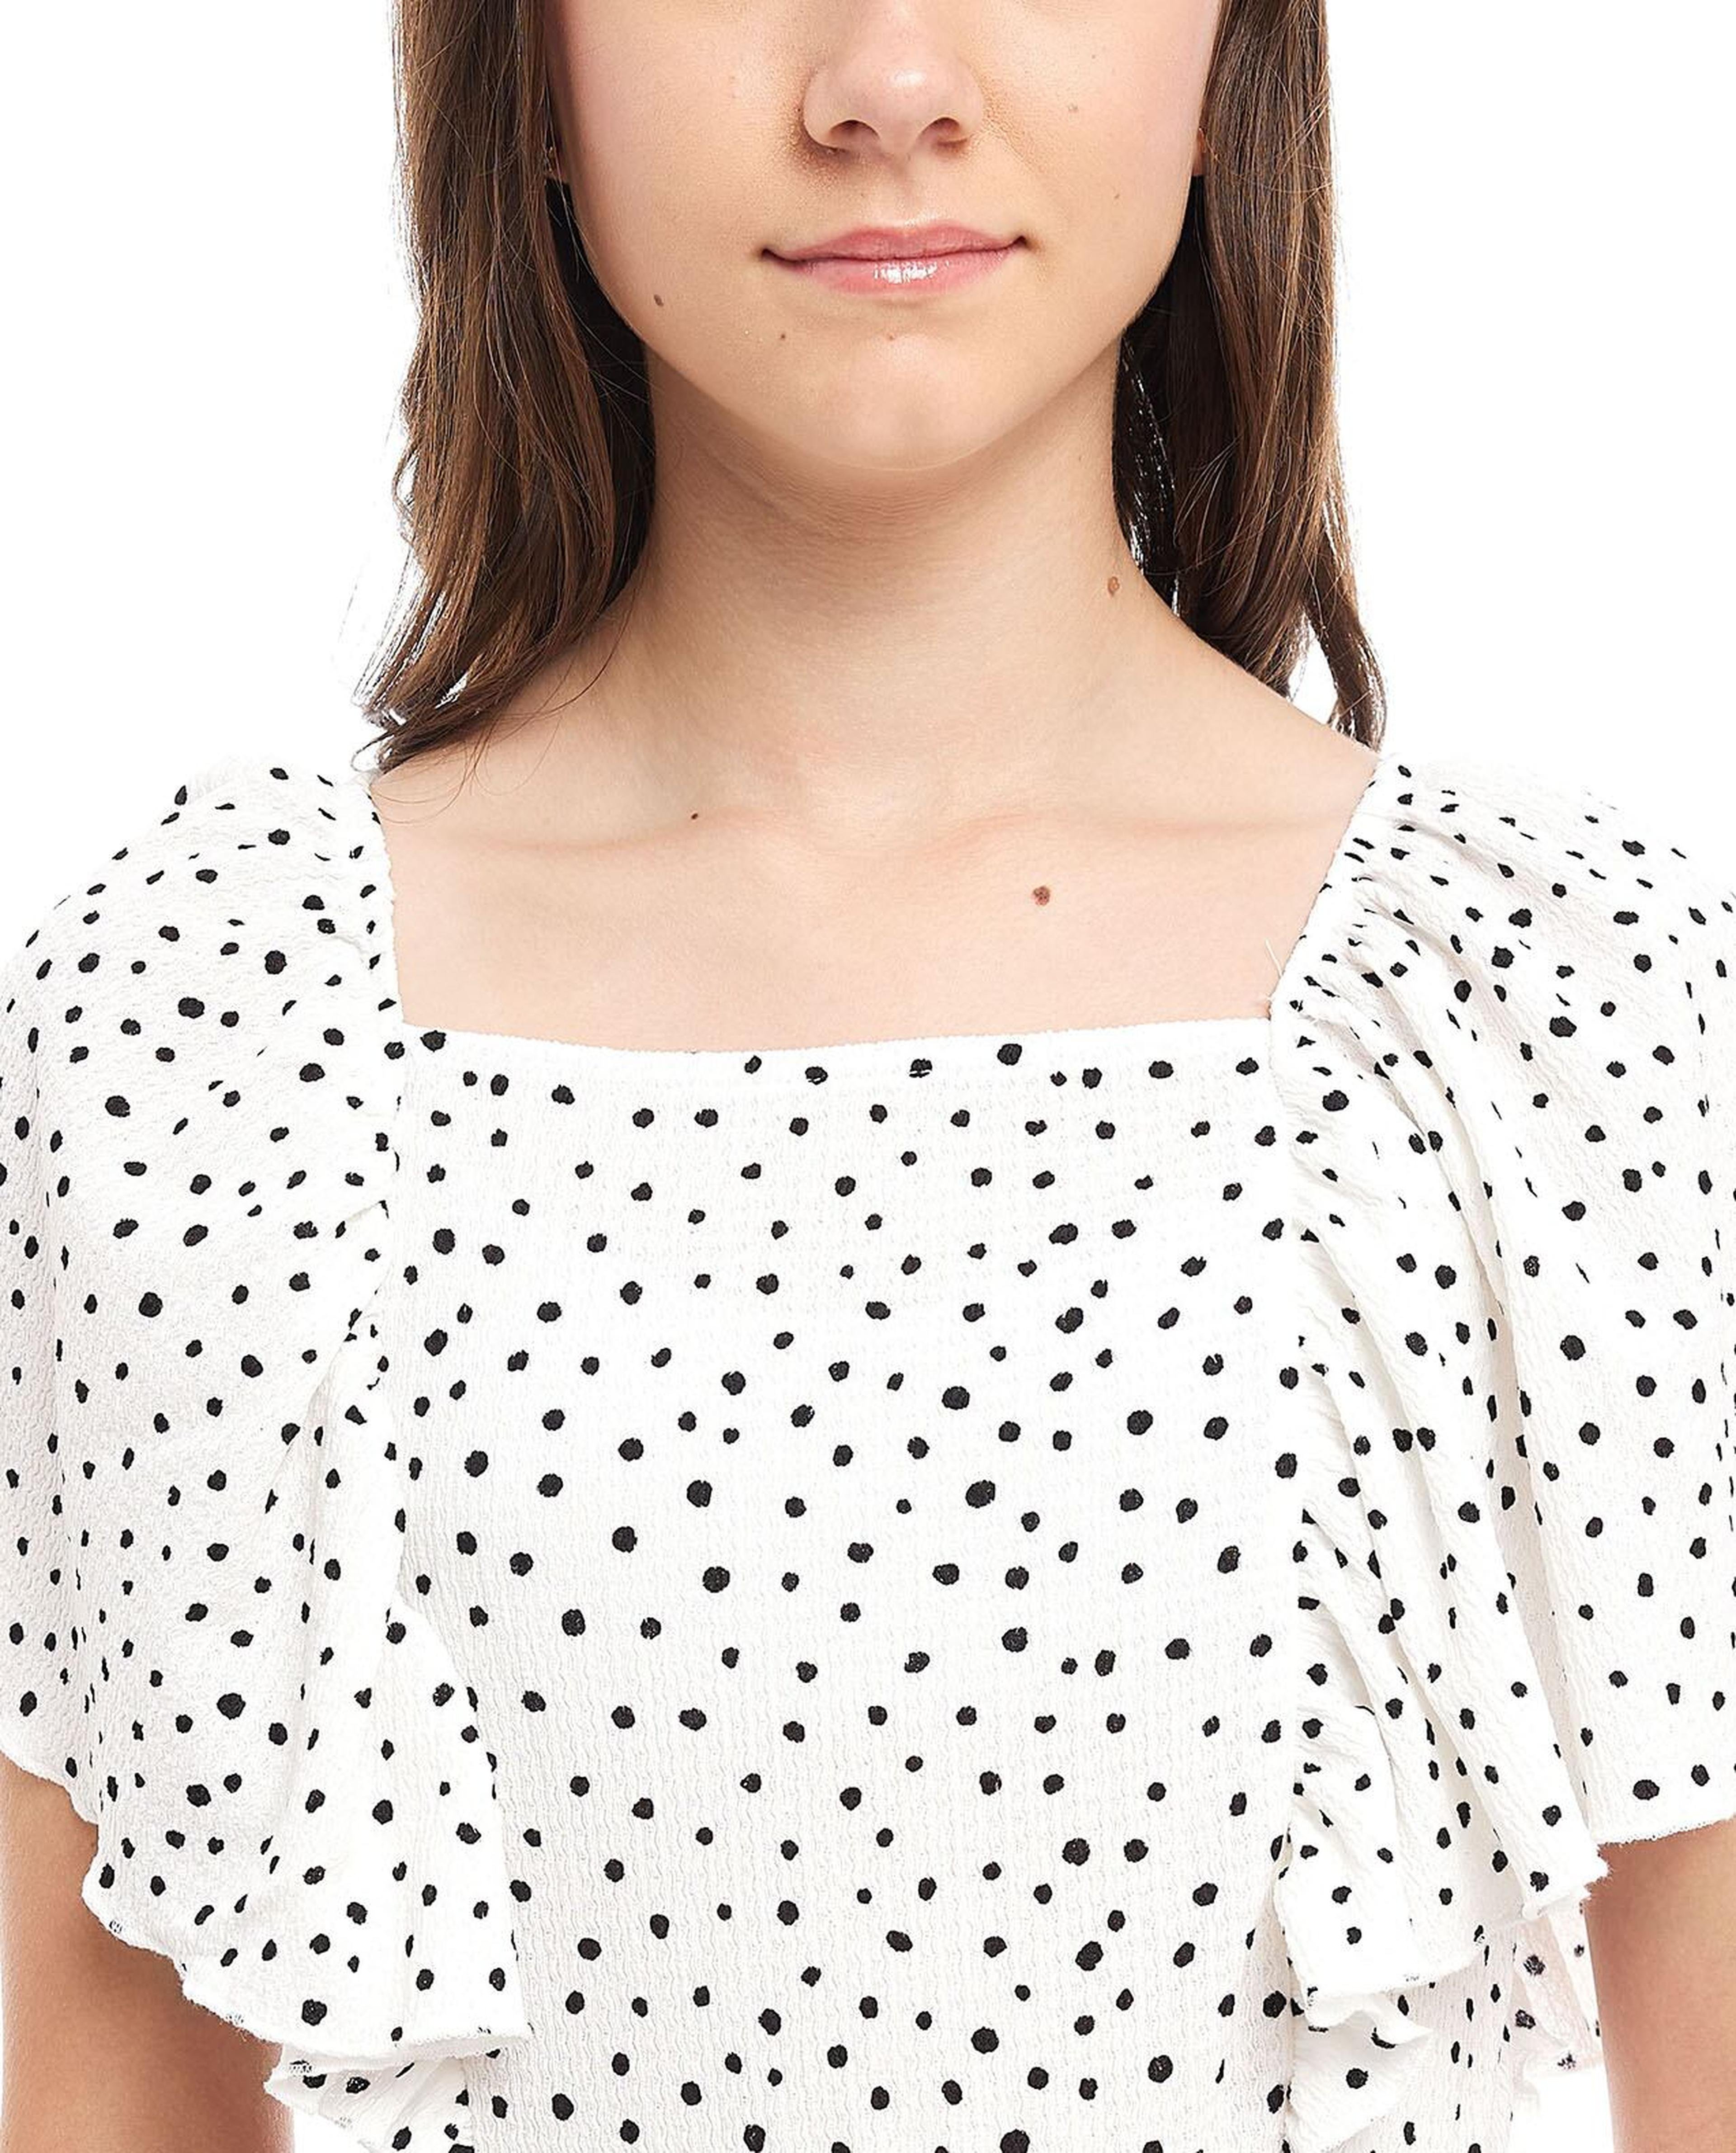 Polka Dots Fit and Flare Dress with Square Neck and Flutter Sleeves